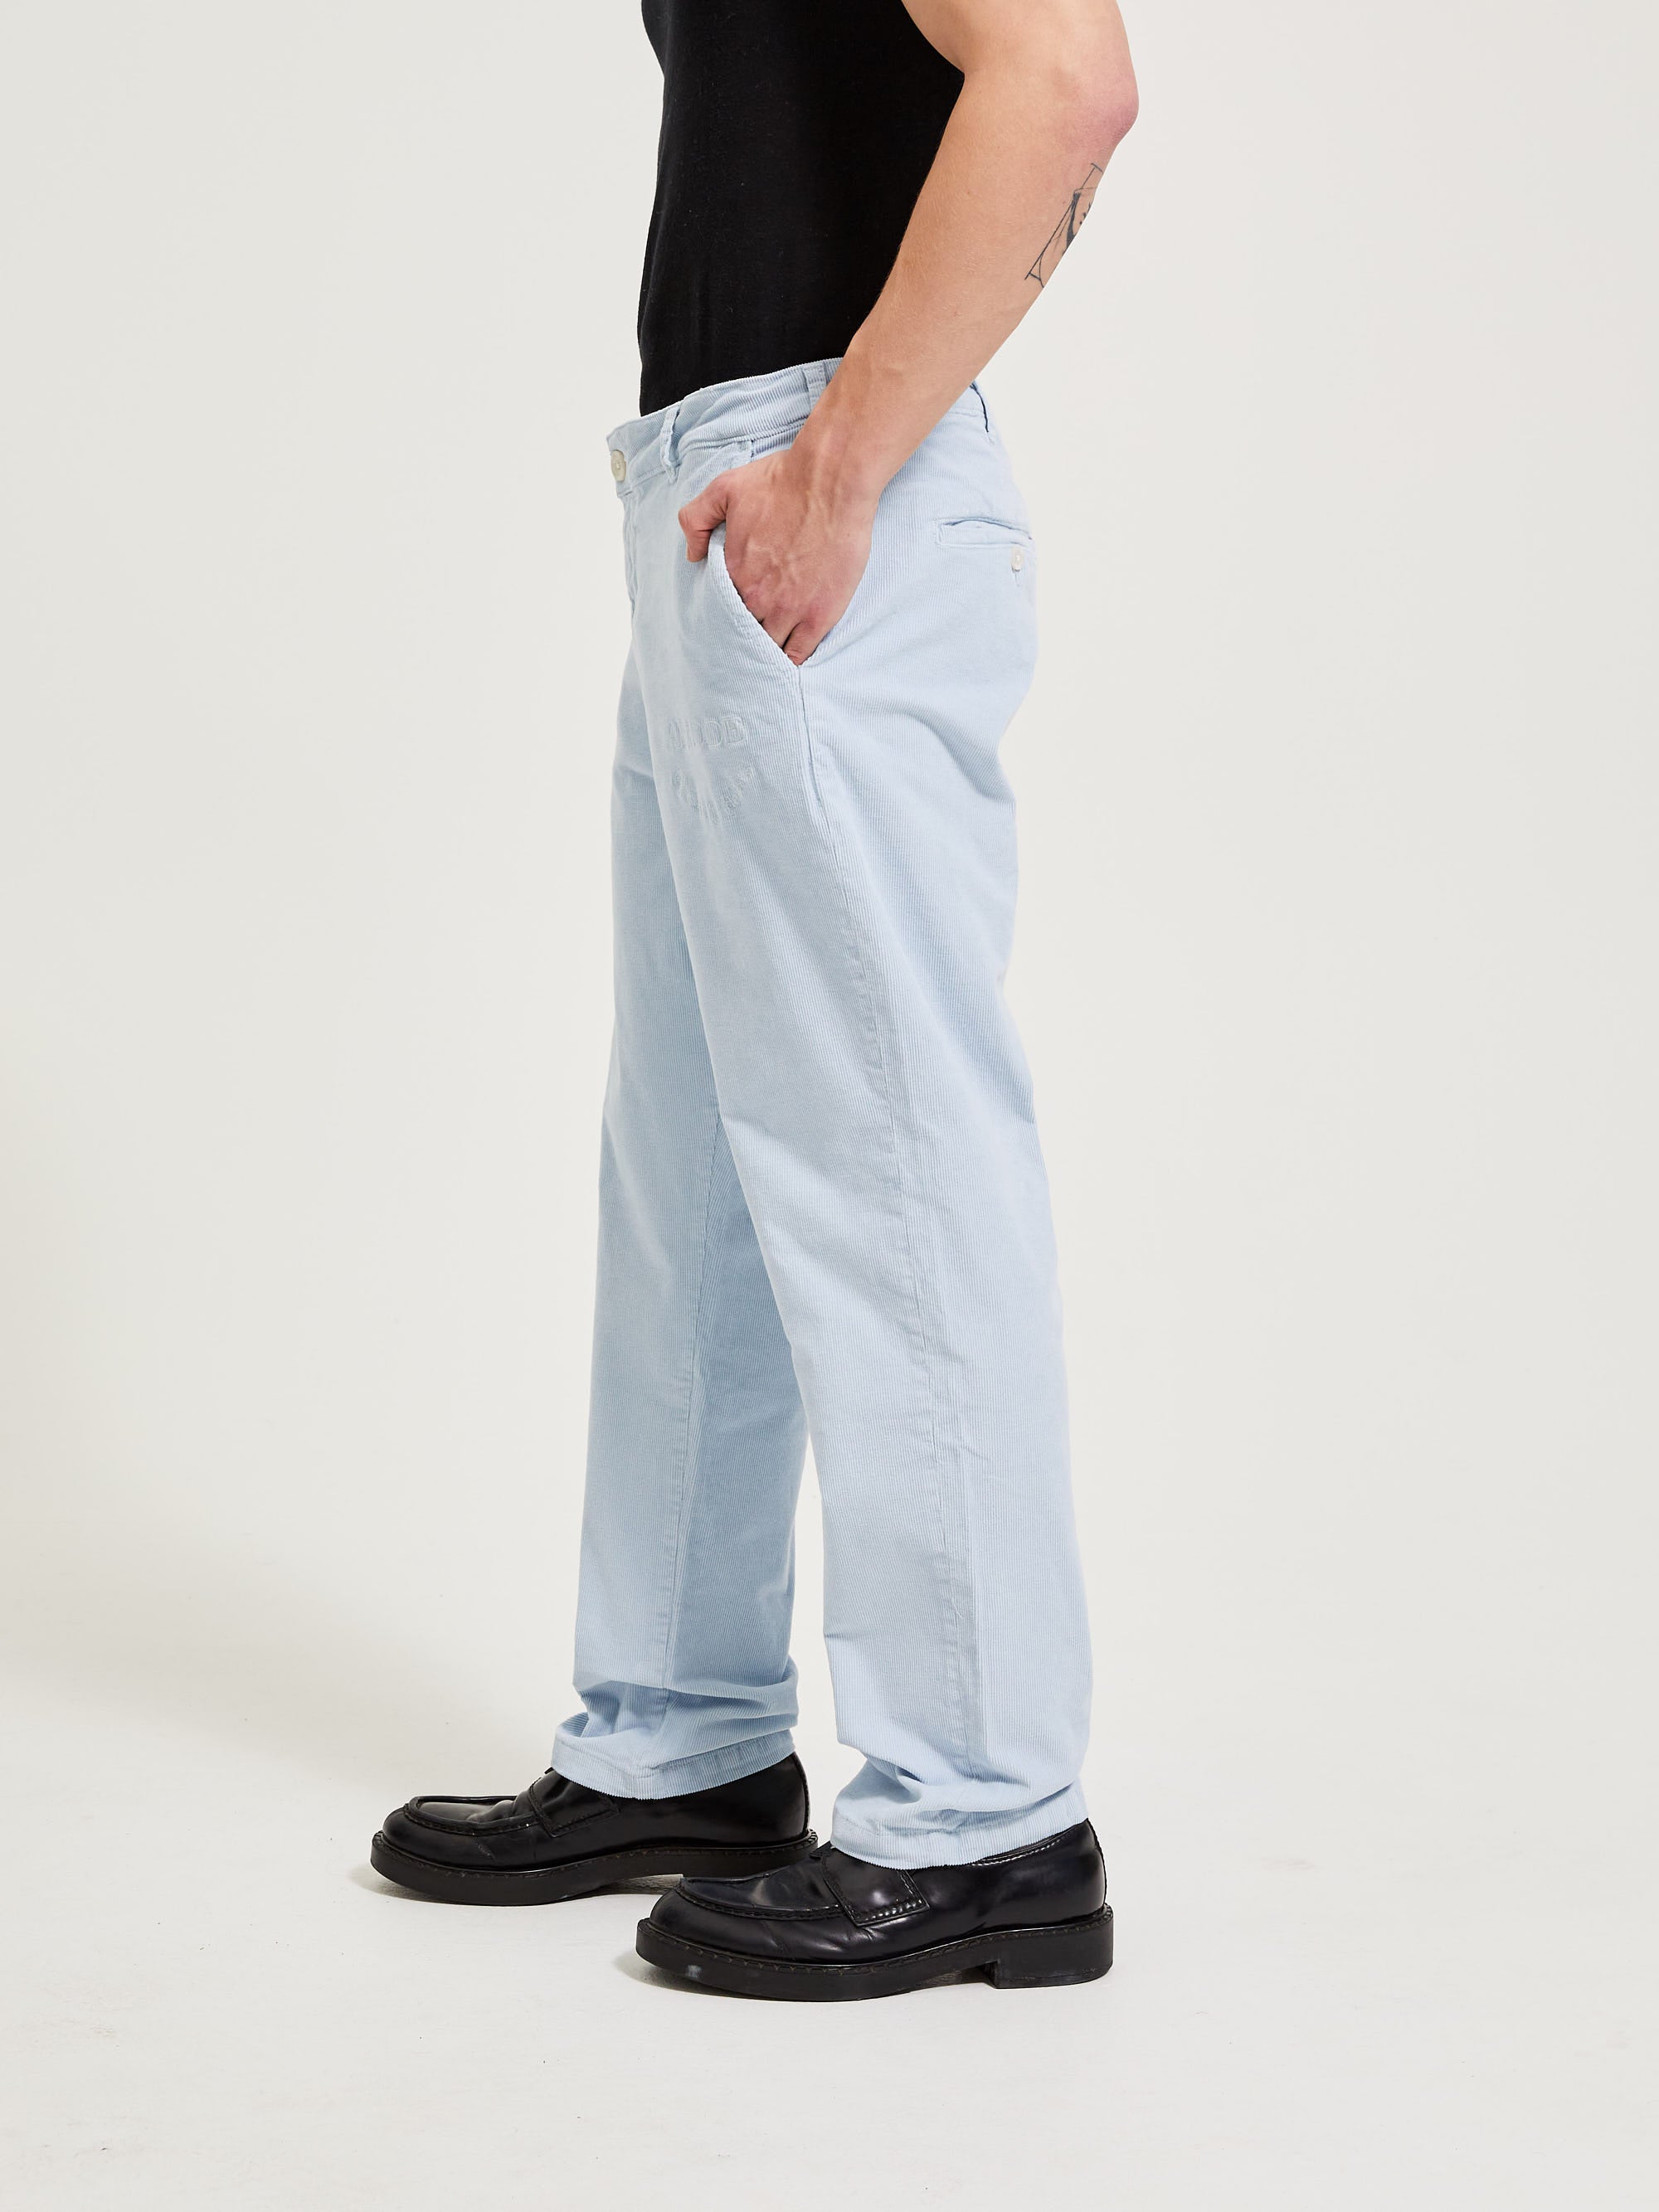 CORDUROY PANTS BABY BLUE - ATTODE